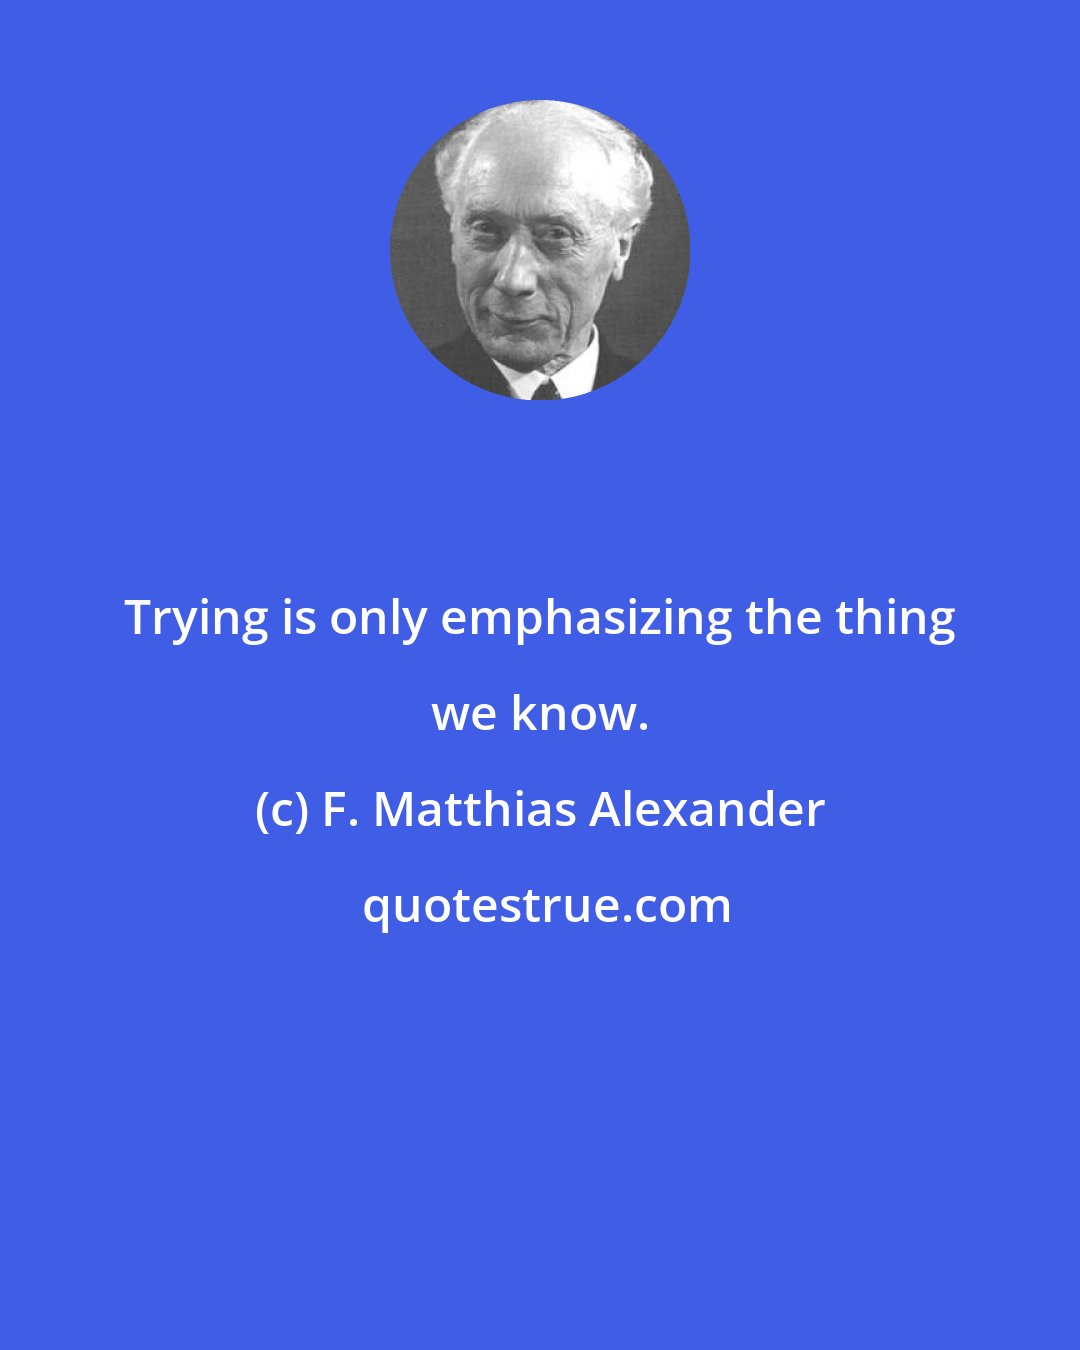 F. Matthias Alexander: Trying is only emphasizing the thing we know.